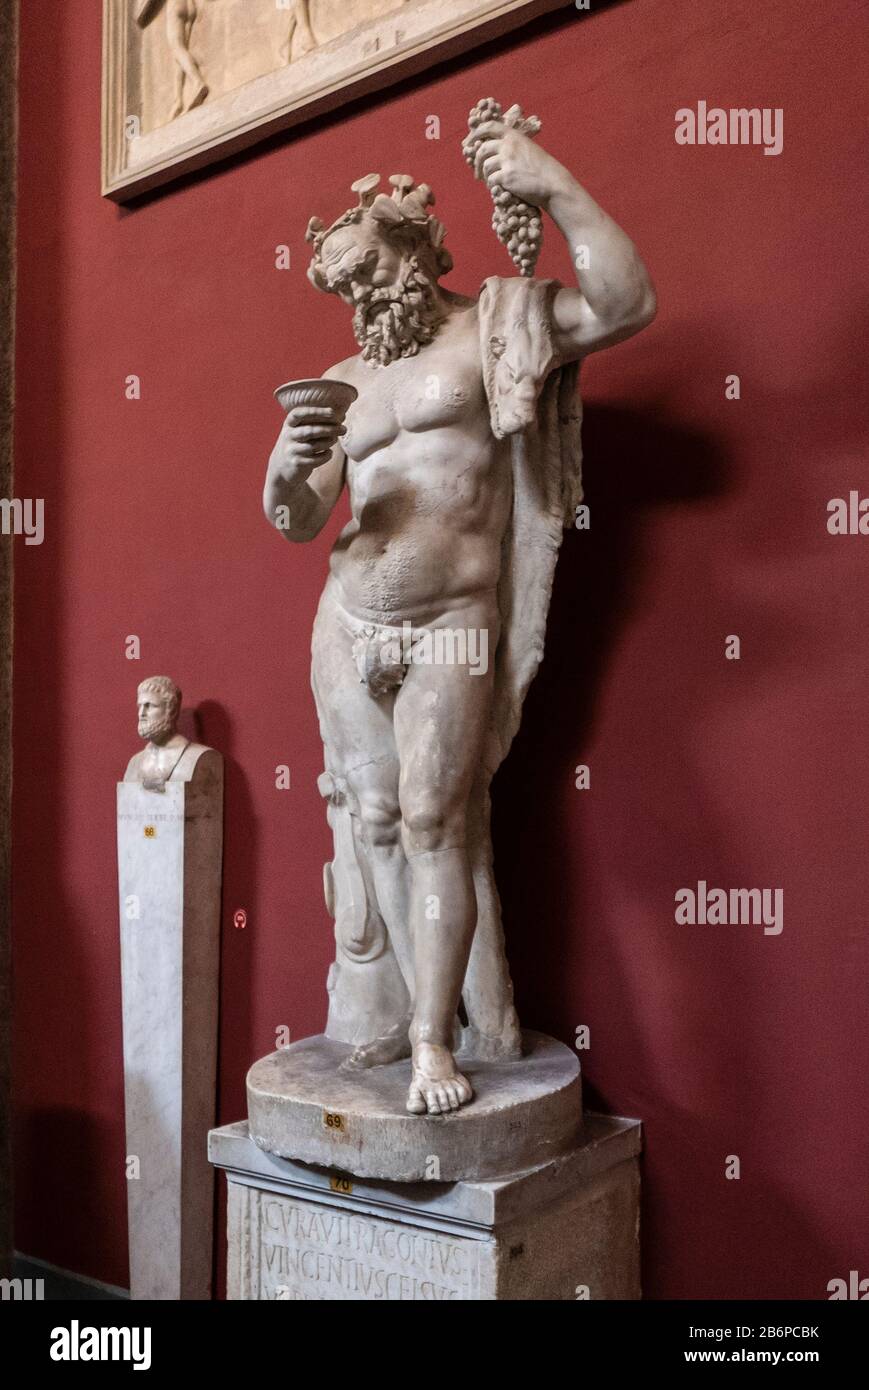 Ancient sculpture of Bacchus, the Roman god of agriculture, wine and fertility. Here with a cluster of grapes in the Vatican Museum, Rome, Italy. Stock Photo